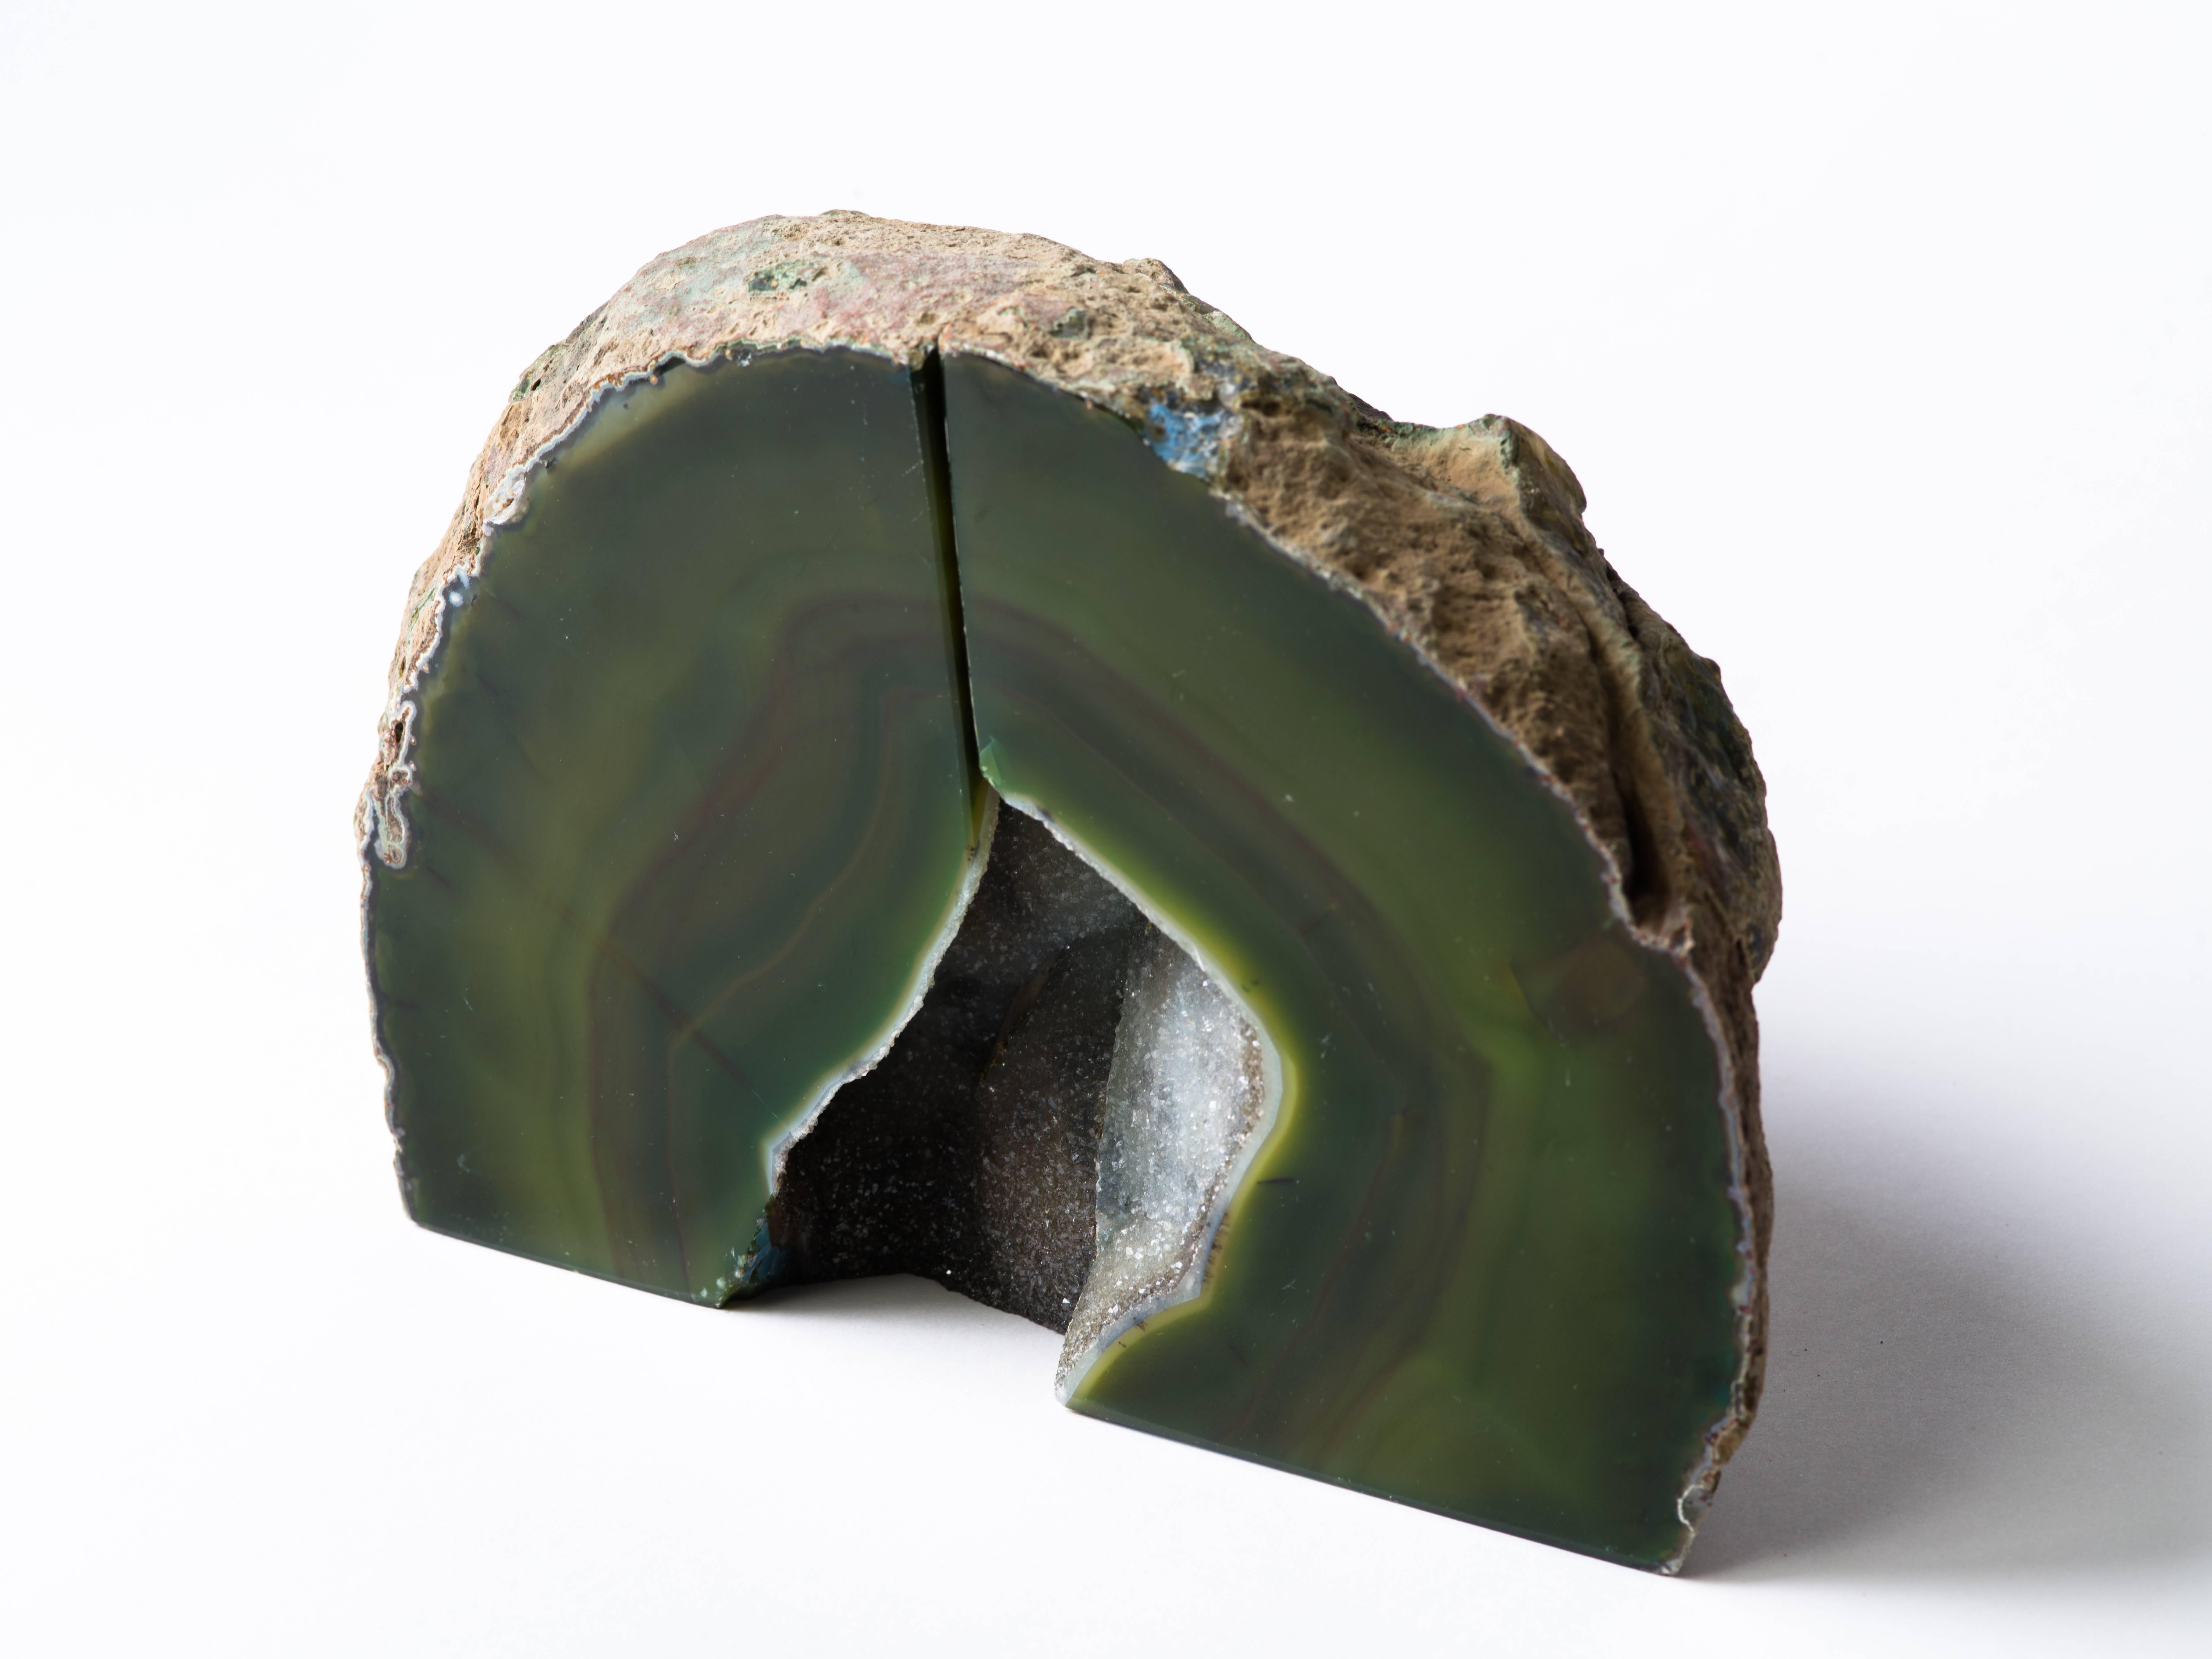 Stunning pair of chunky organic modern specimens. Hand-cut agate stone with rock quartz crystalline centres. Polished front and sides with natural raw edges. In striped hues of moss green, olive, and brown. Elegant shelf and desk accessories, and